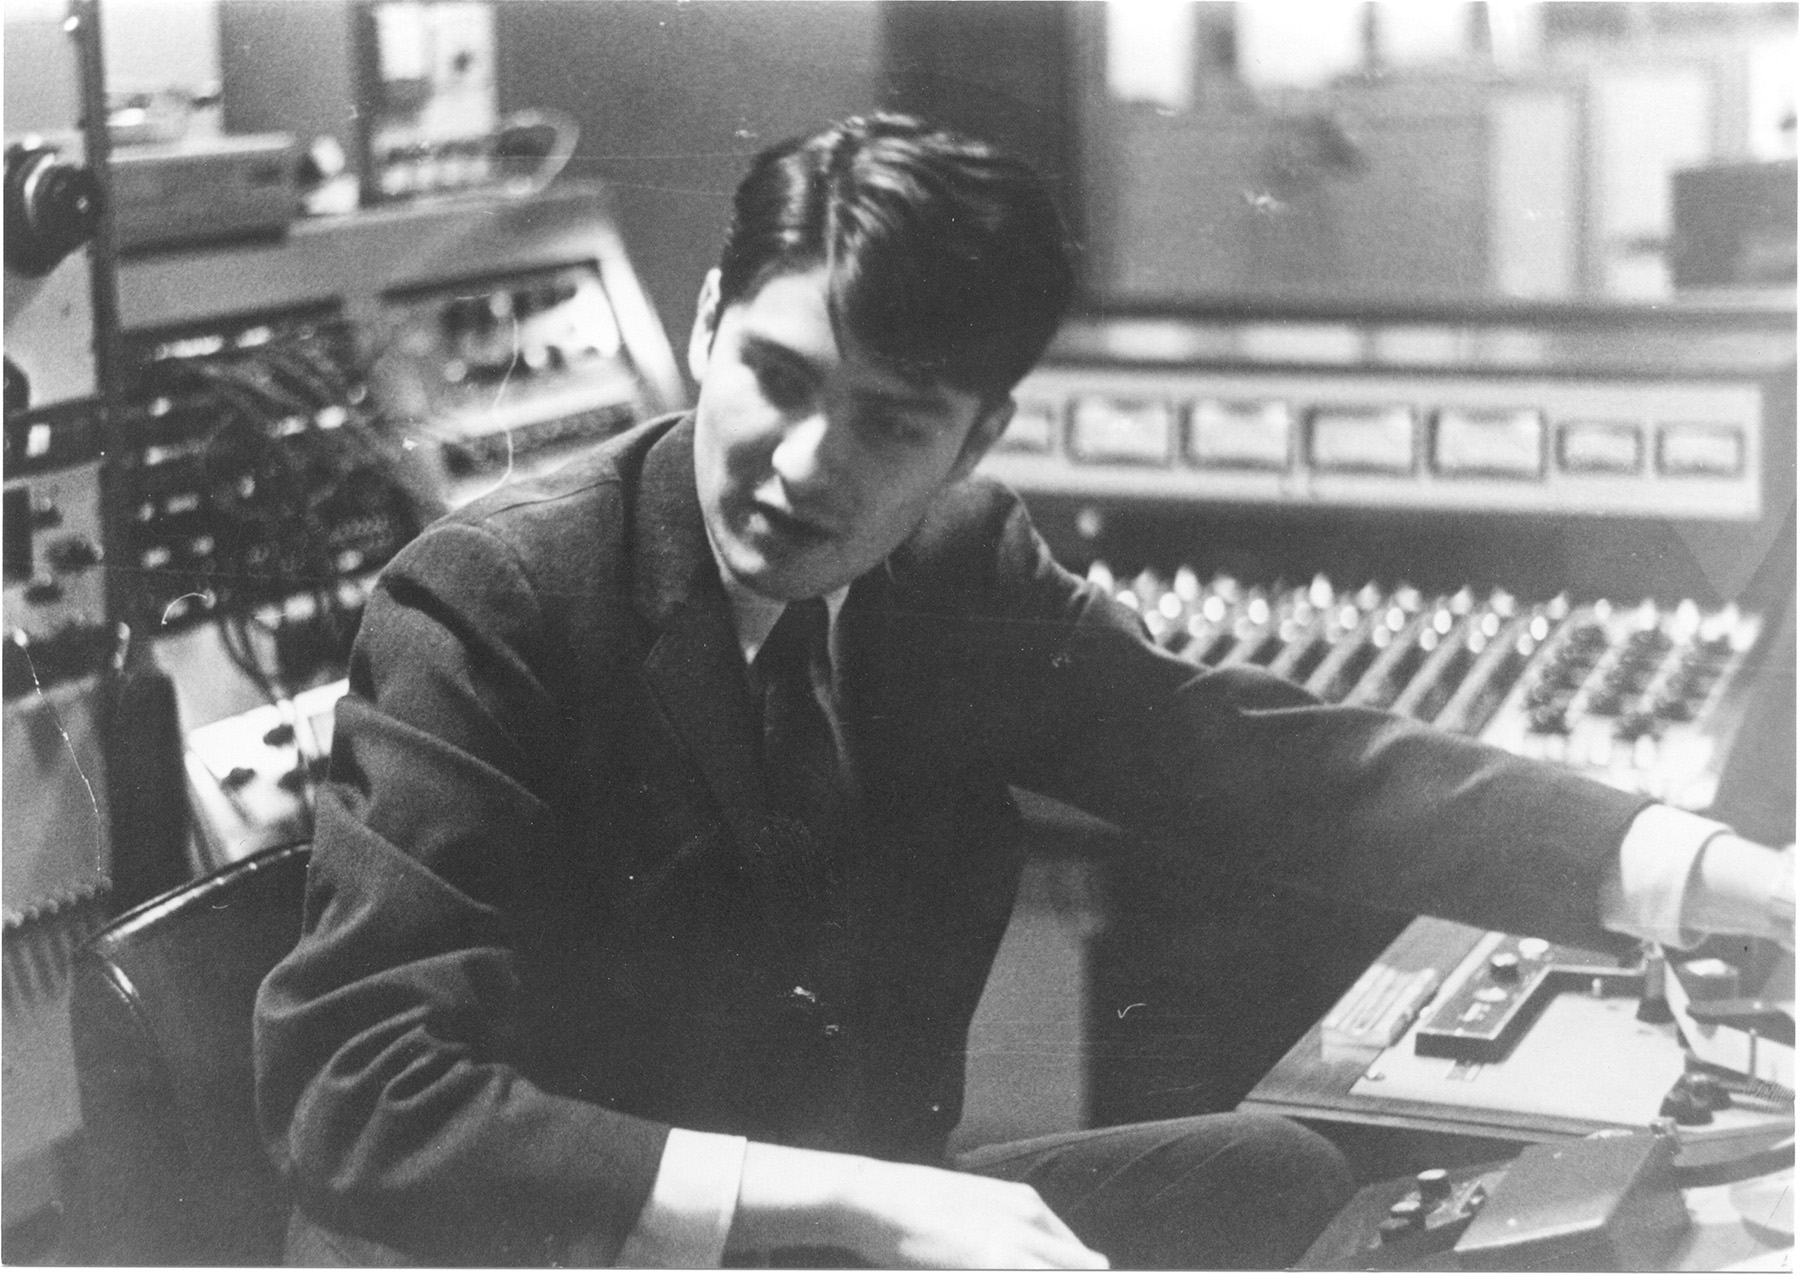  Ardent founder John Fry at Ardent, around 1970.